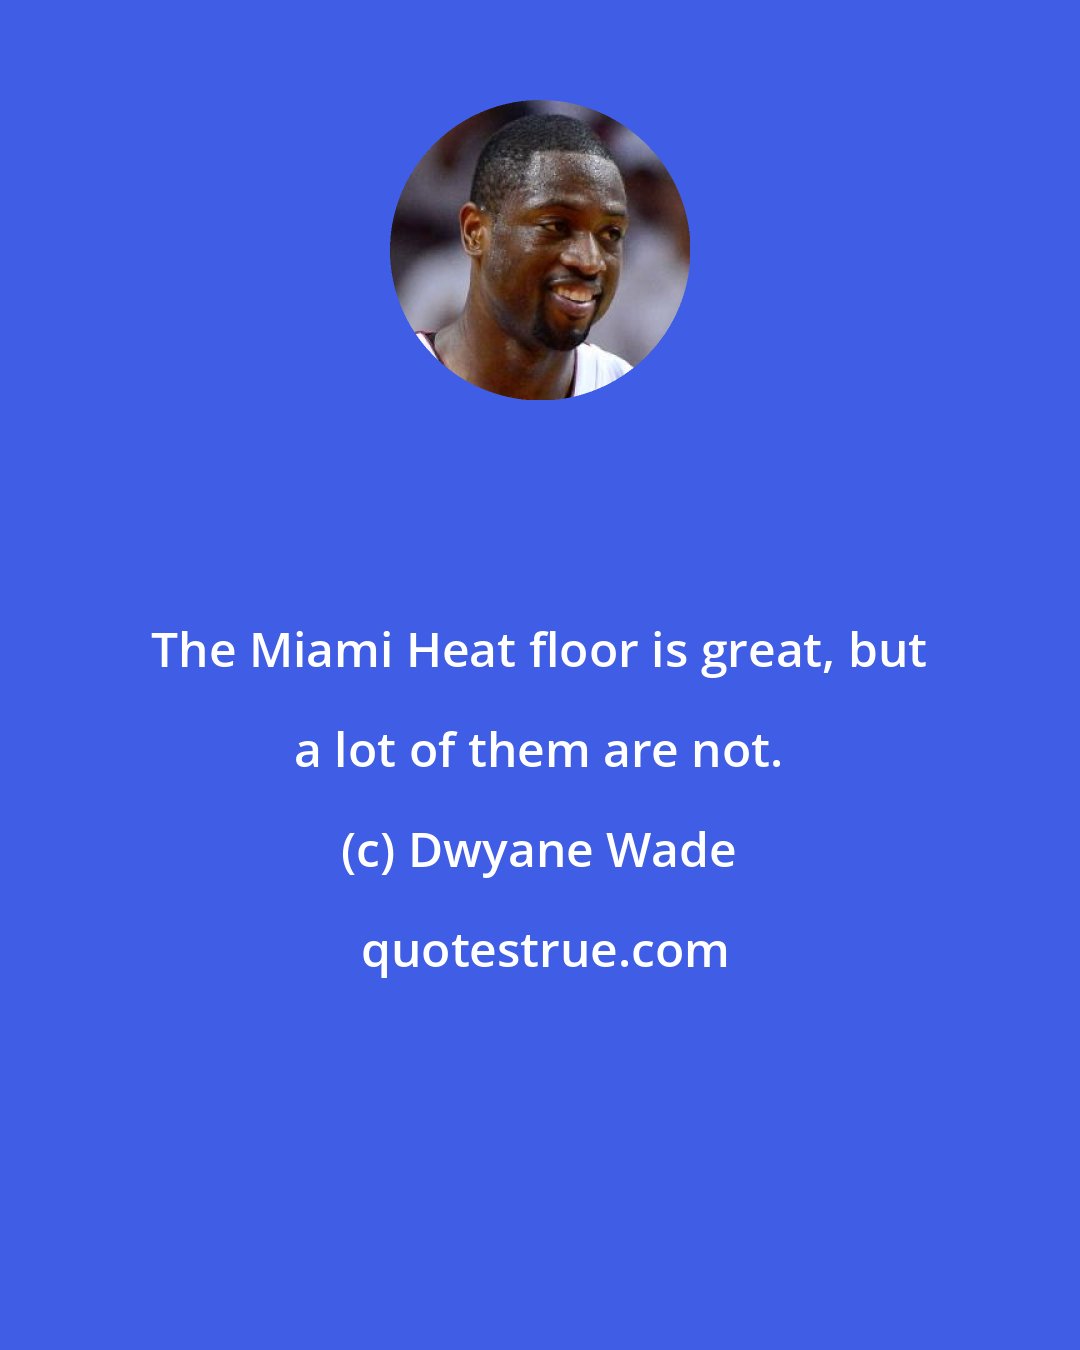 Dwyane Wade: The Miami Heat floor is great, but a lot of them are not.